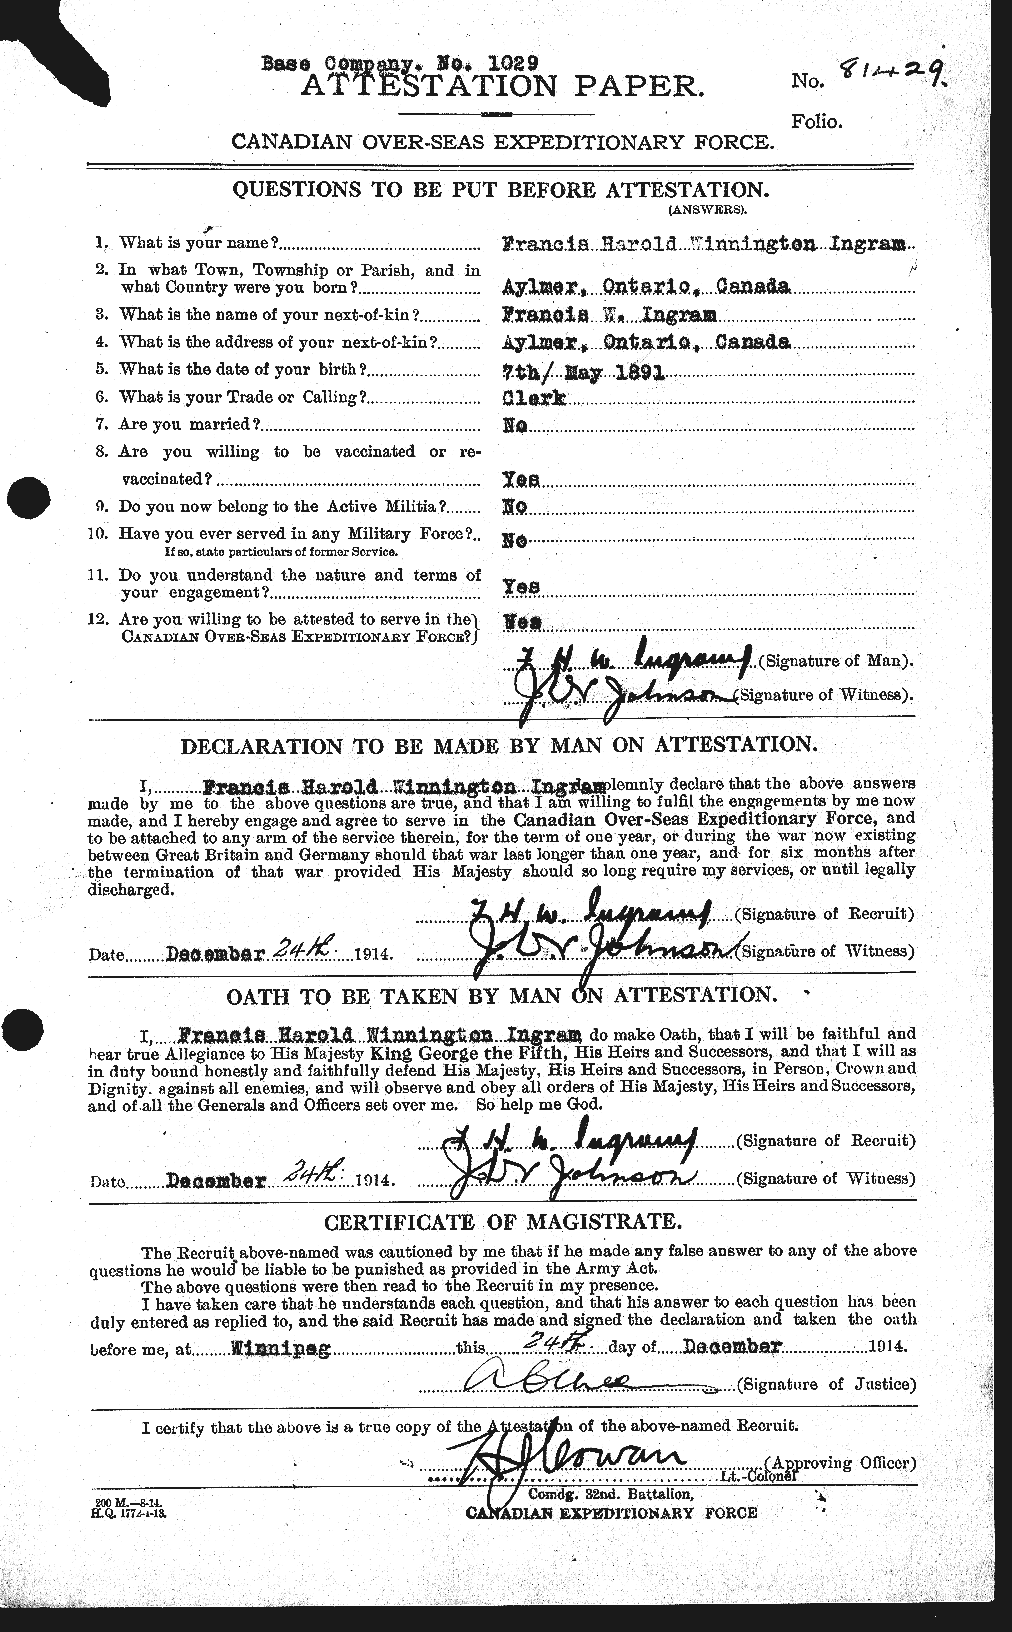 Personnel Records of the First World War - CEF 411126a